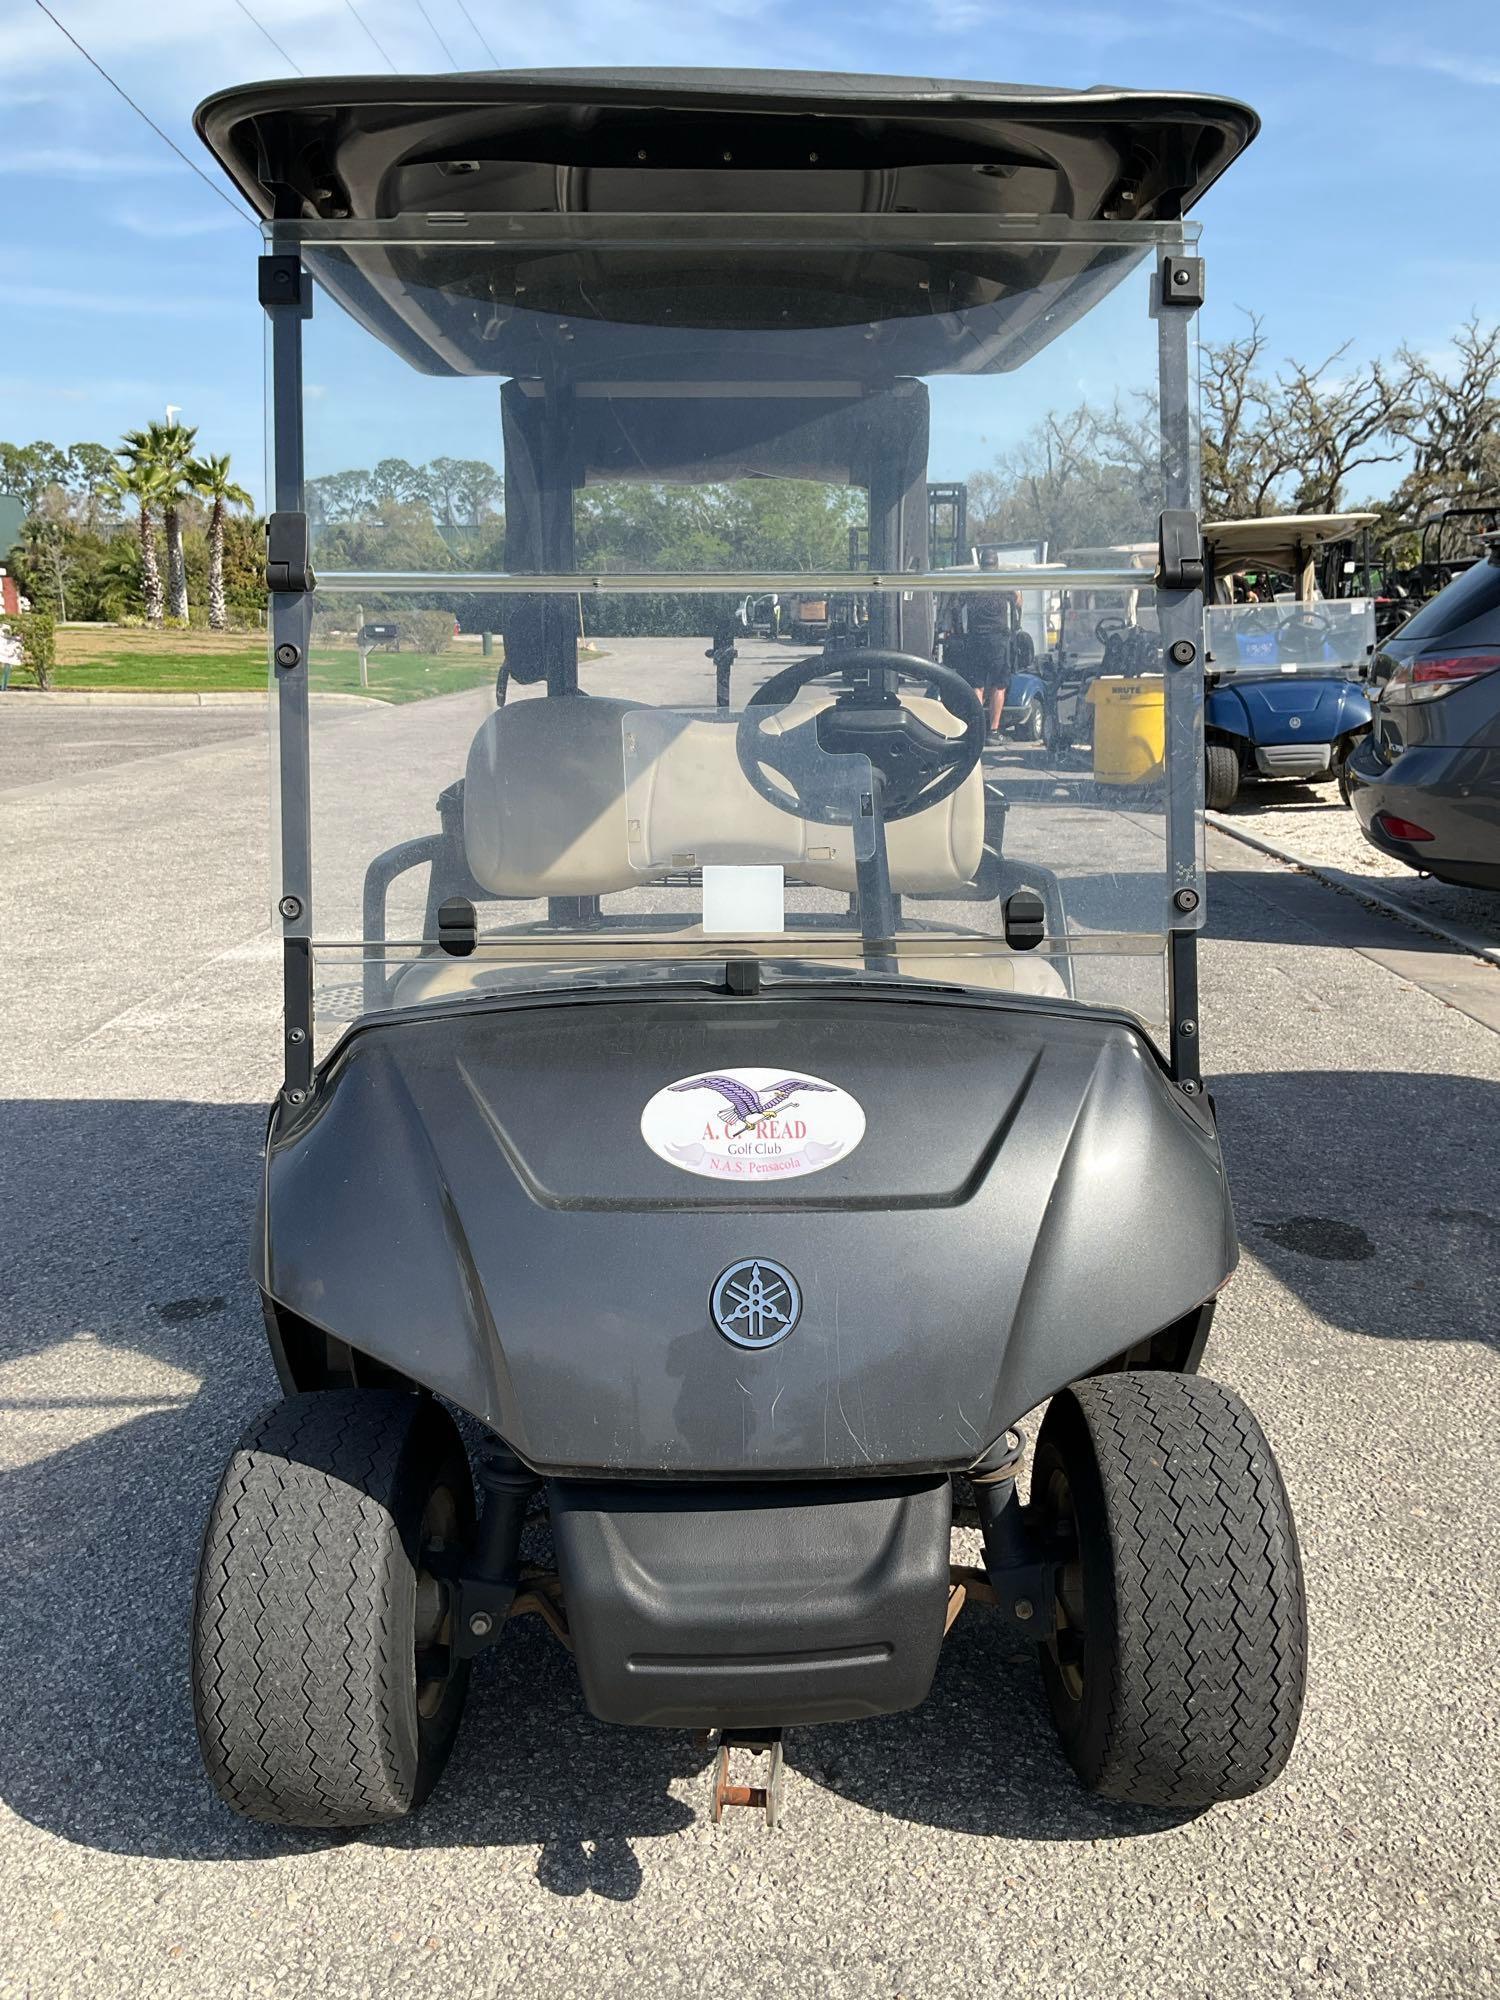 2019 YAMAHA GOLF CART MODEL DR2E19, ELECTRIC, 48VOLTS, BILL OF SALE ONLY , BATTERY CHARGER INCLUD...